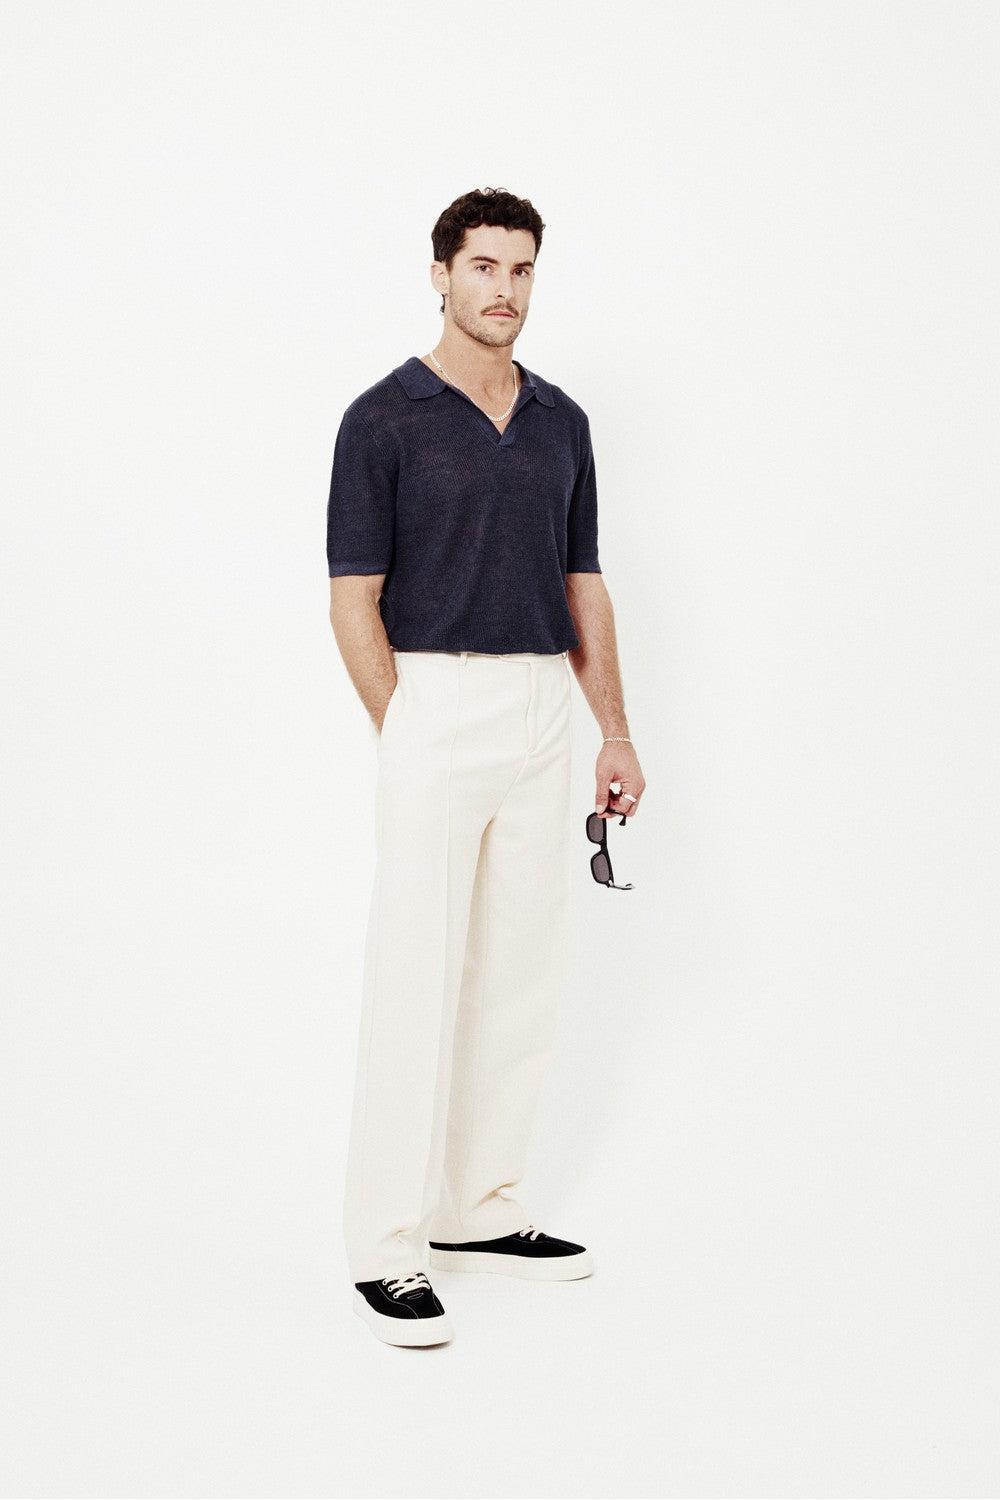 Kore Studios Luca Linen Polo - Midnight | Kore Studios | Mad About The Boy